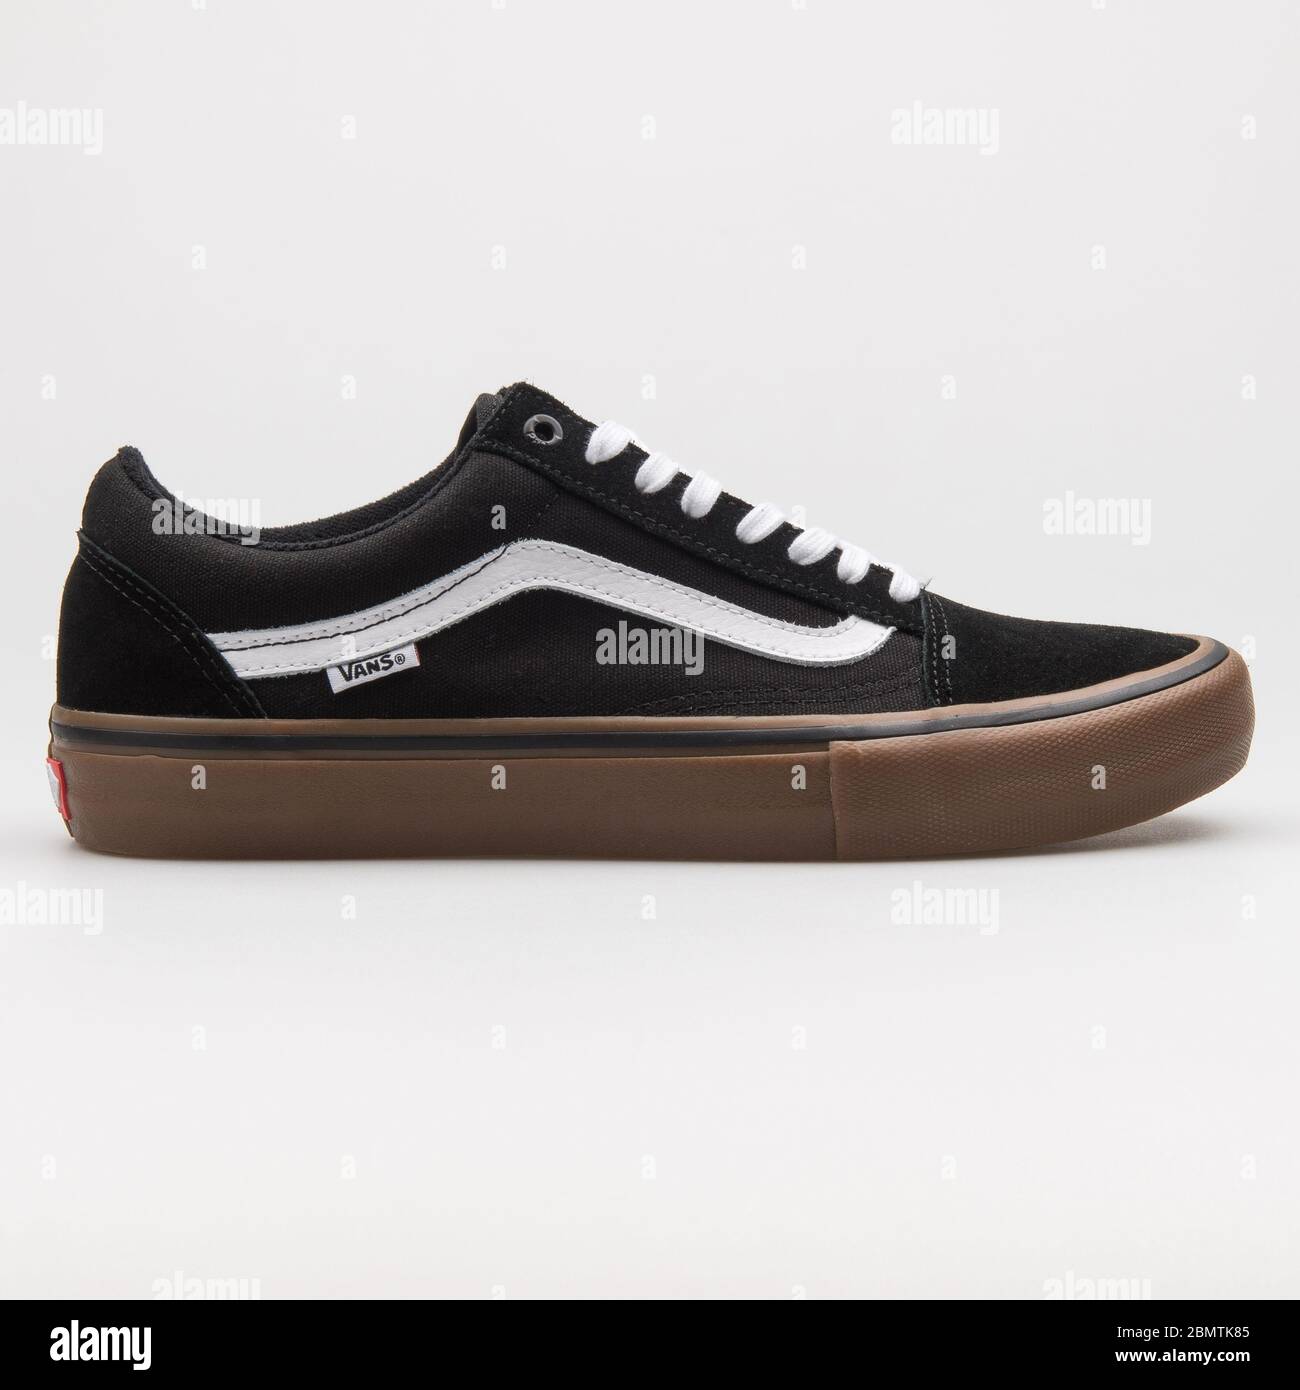 Brown Vans Sneakers High Resolution Stock Photography and Images - Alamy